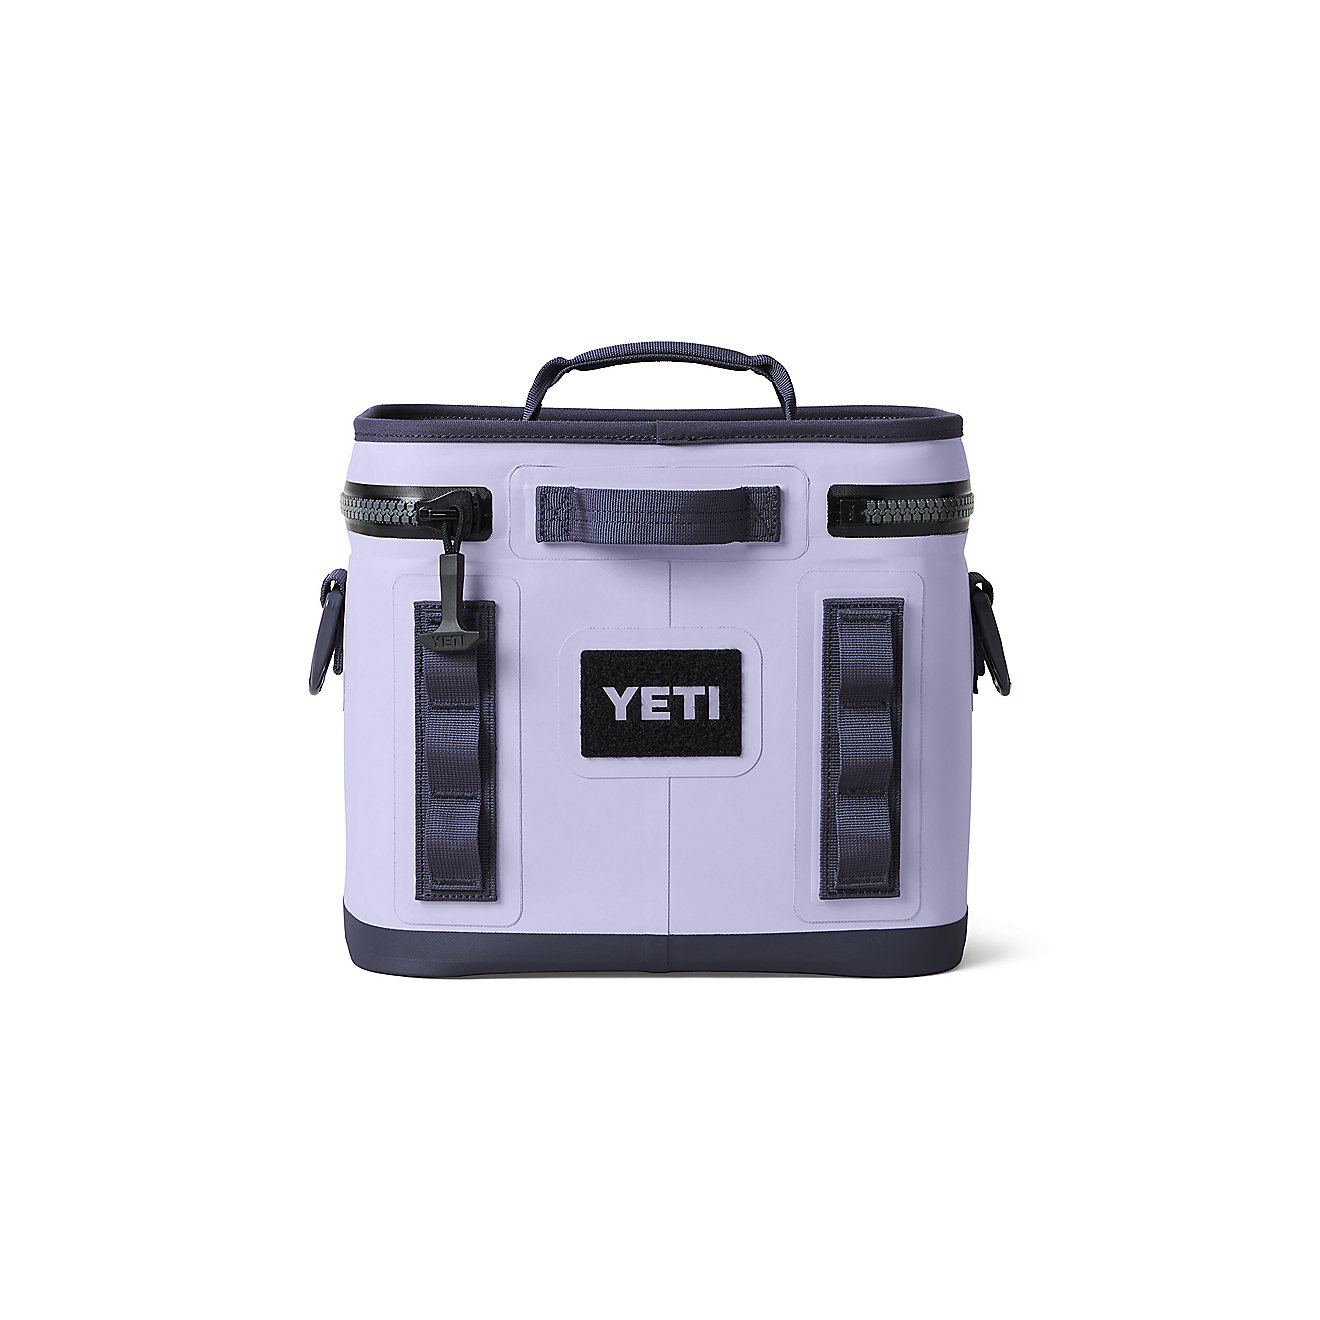 https://academy.scene7.com/is/image/academy//coolers/yeti-hopper-flip-8-soft-cooler-18060131200-purple/43ac8091777a4be1855dc892c1e451af?$pdp-mobile-gallery-ng$